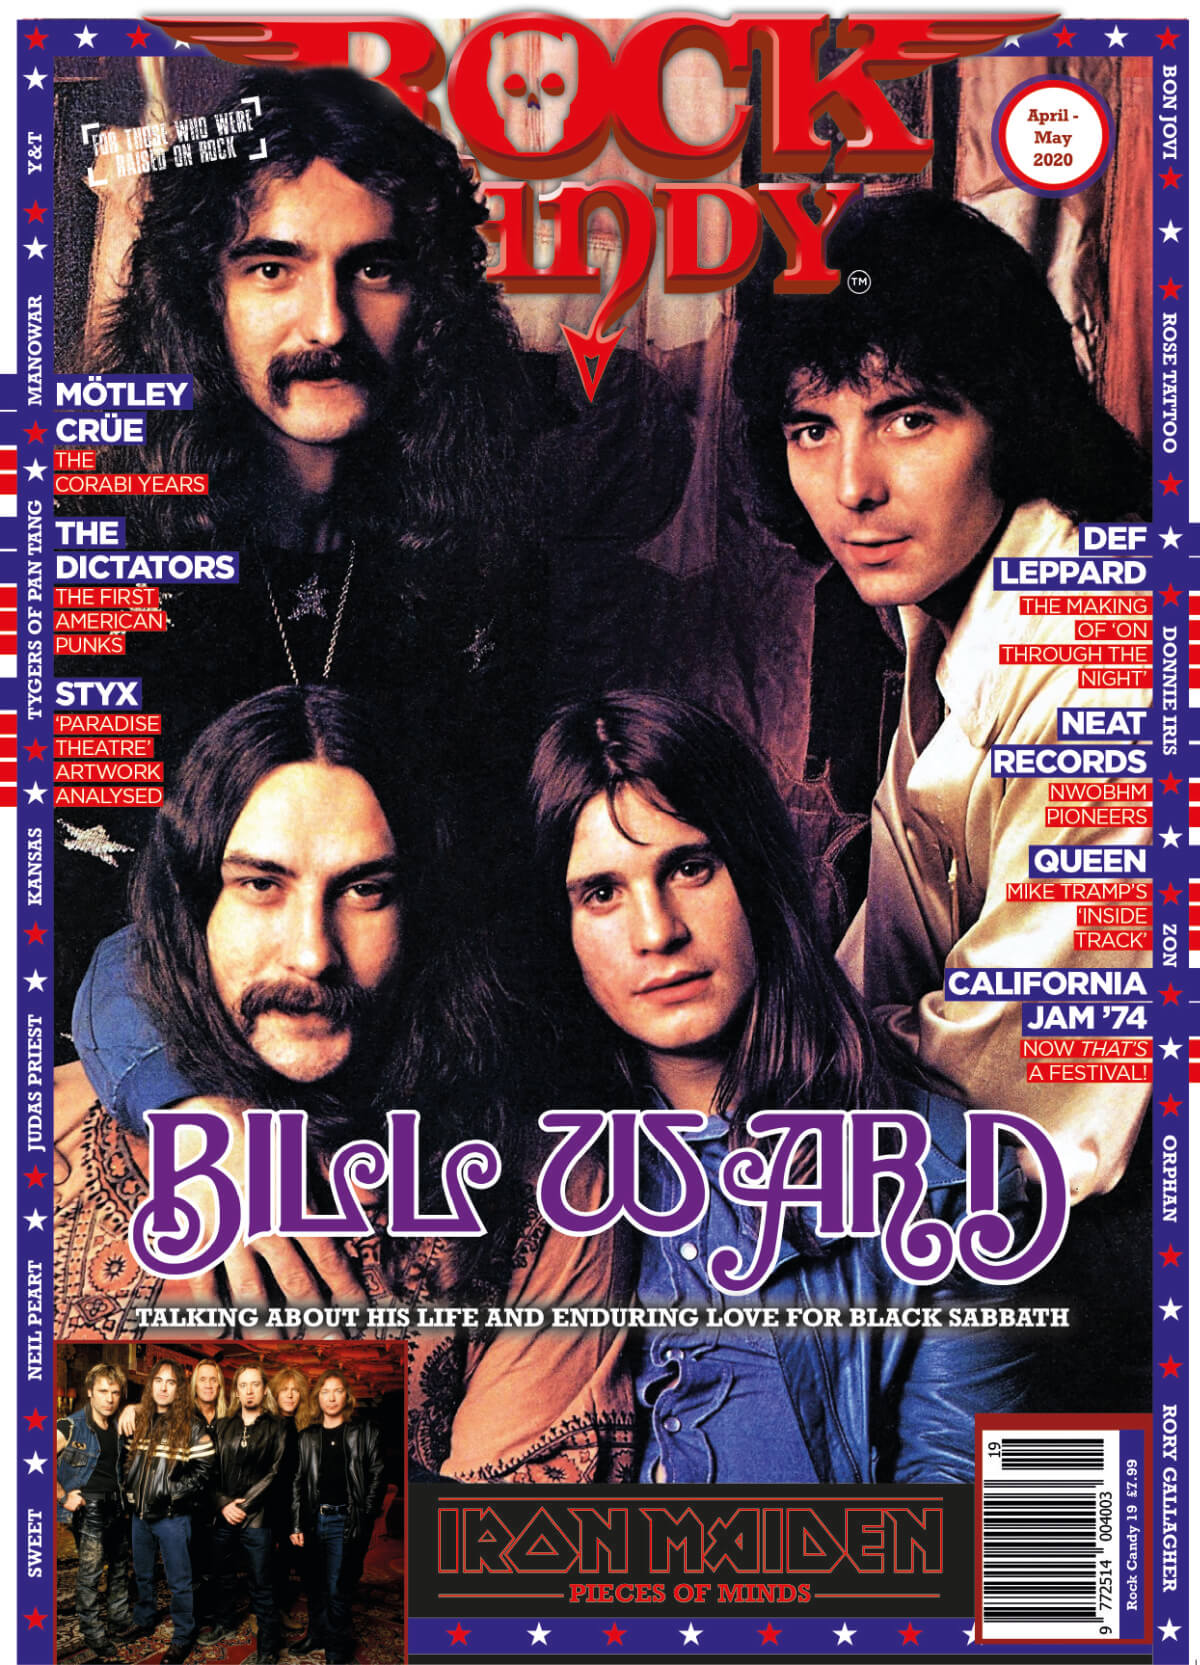 Issue 19 is available right now, featuring our Black Sabbath cover story interview with Bill Ward.